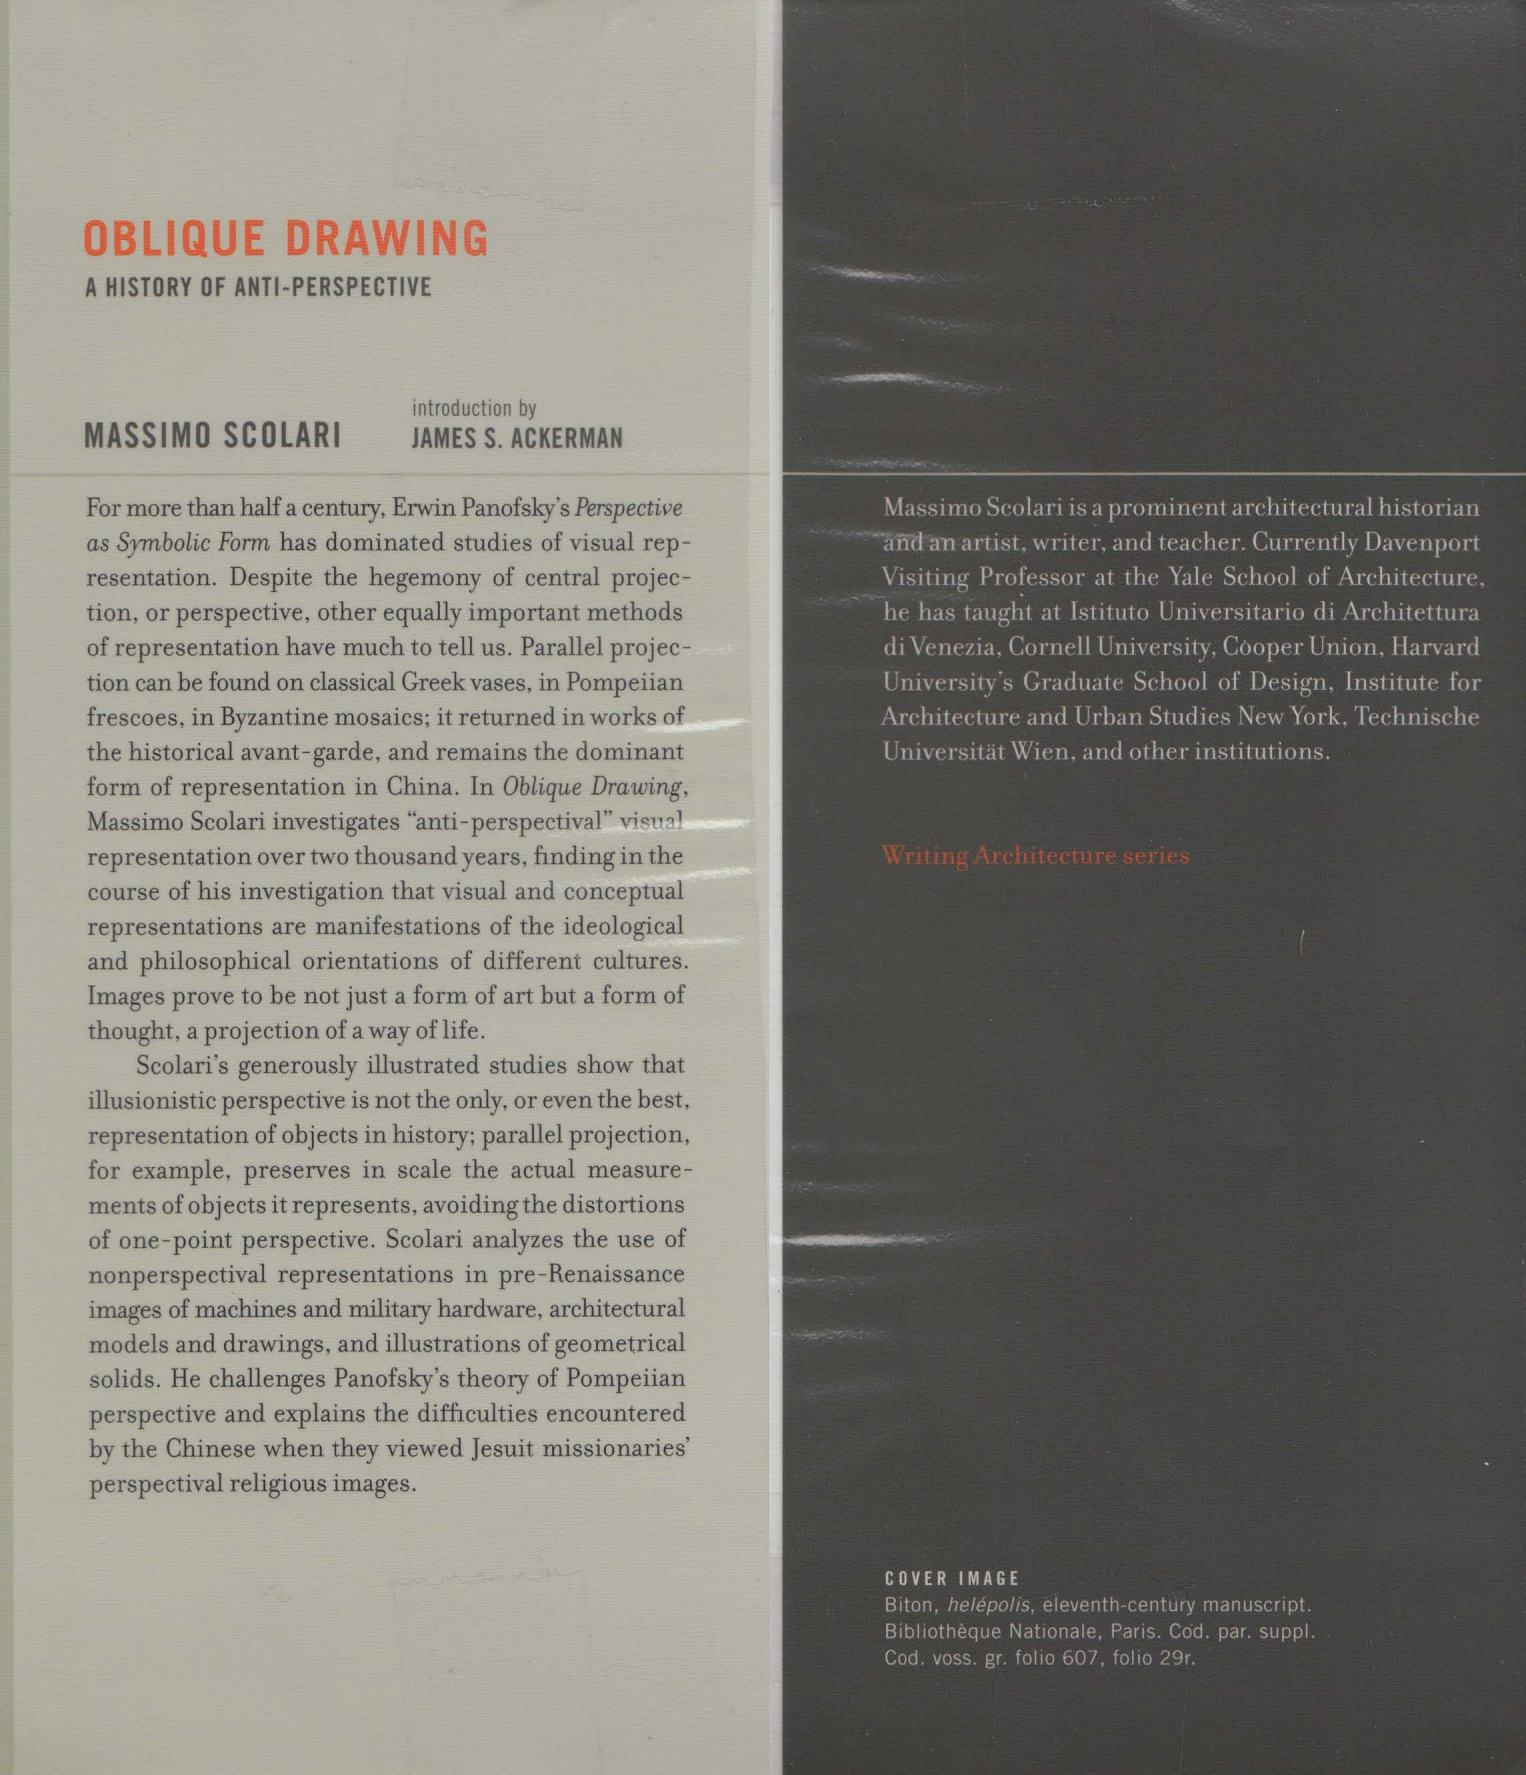 Oblique Drawing: A History of Anti-Perspective / Massimo Scolari ; Introduction by James S. Ackerman. — Cambridge, Massachusetts ; London, England : The MIT Press, 2012